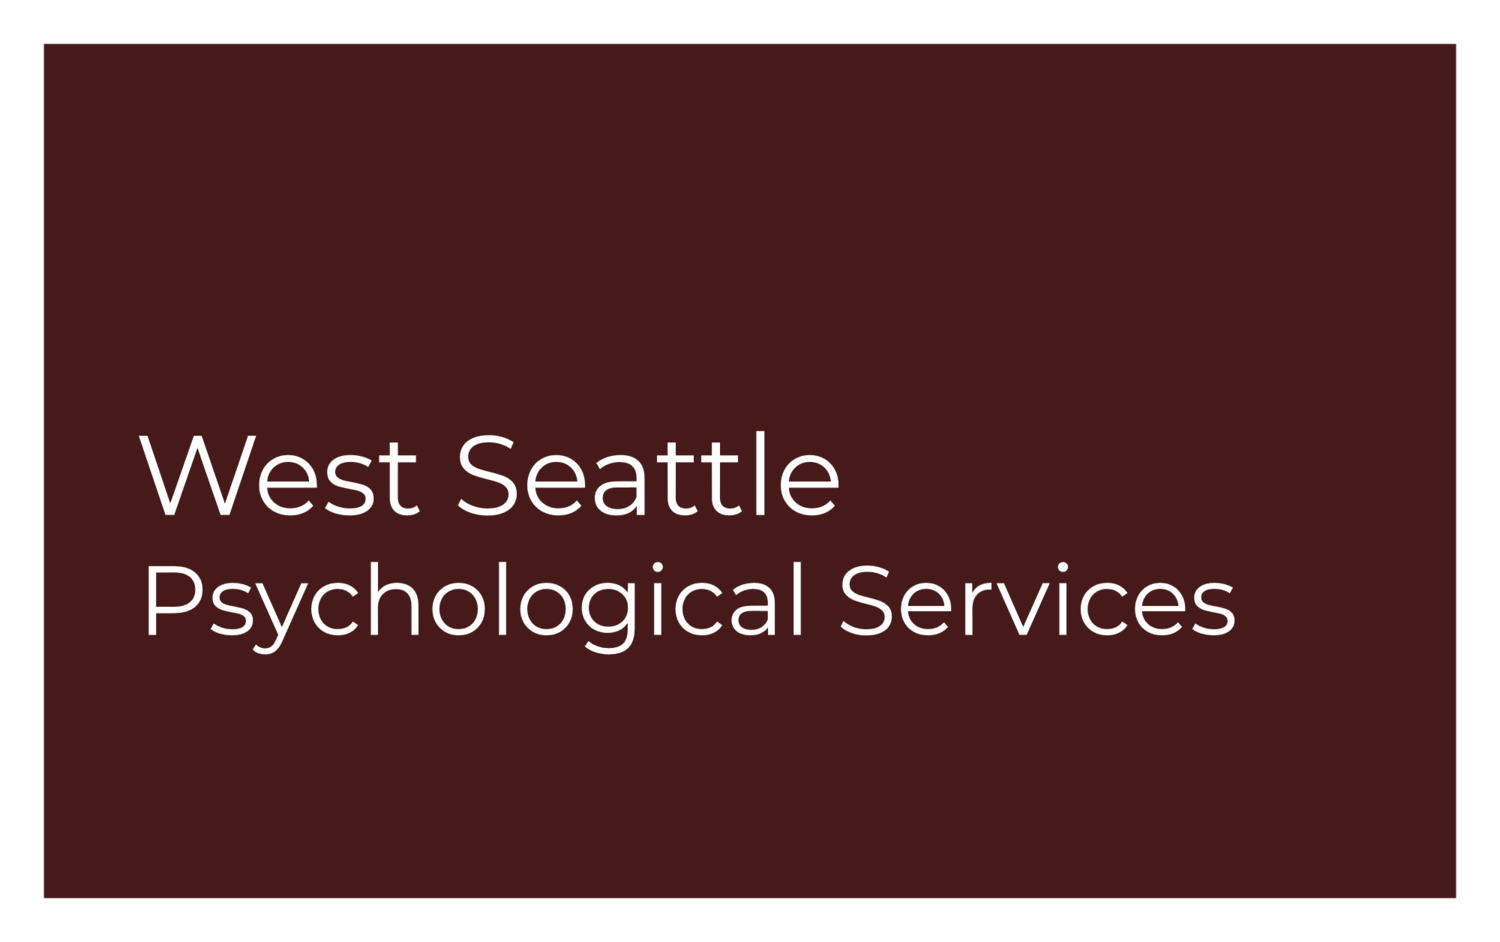 West Seattle Psychological Services